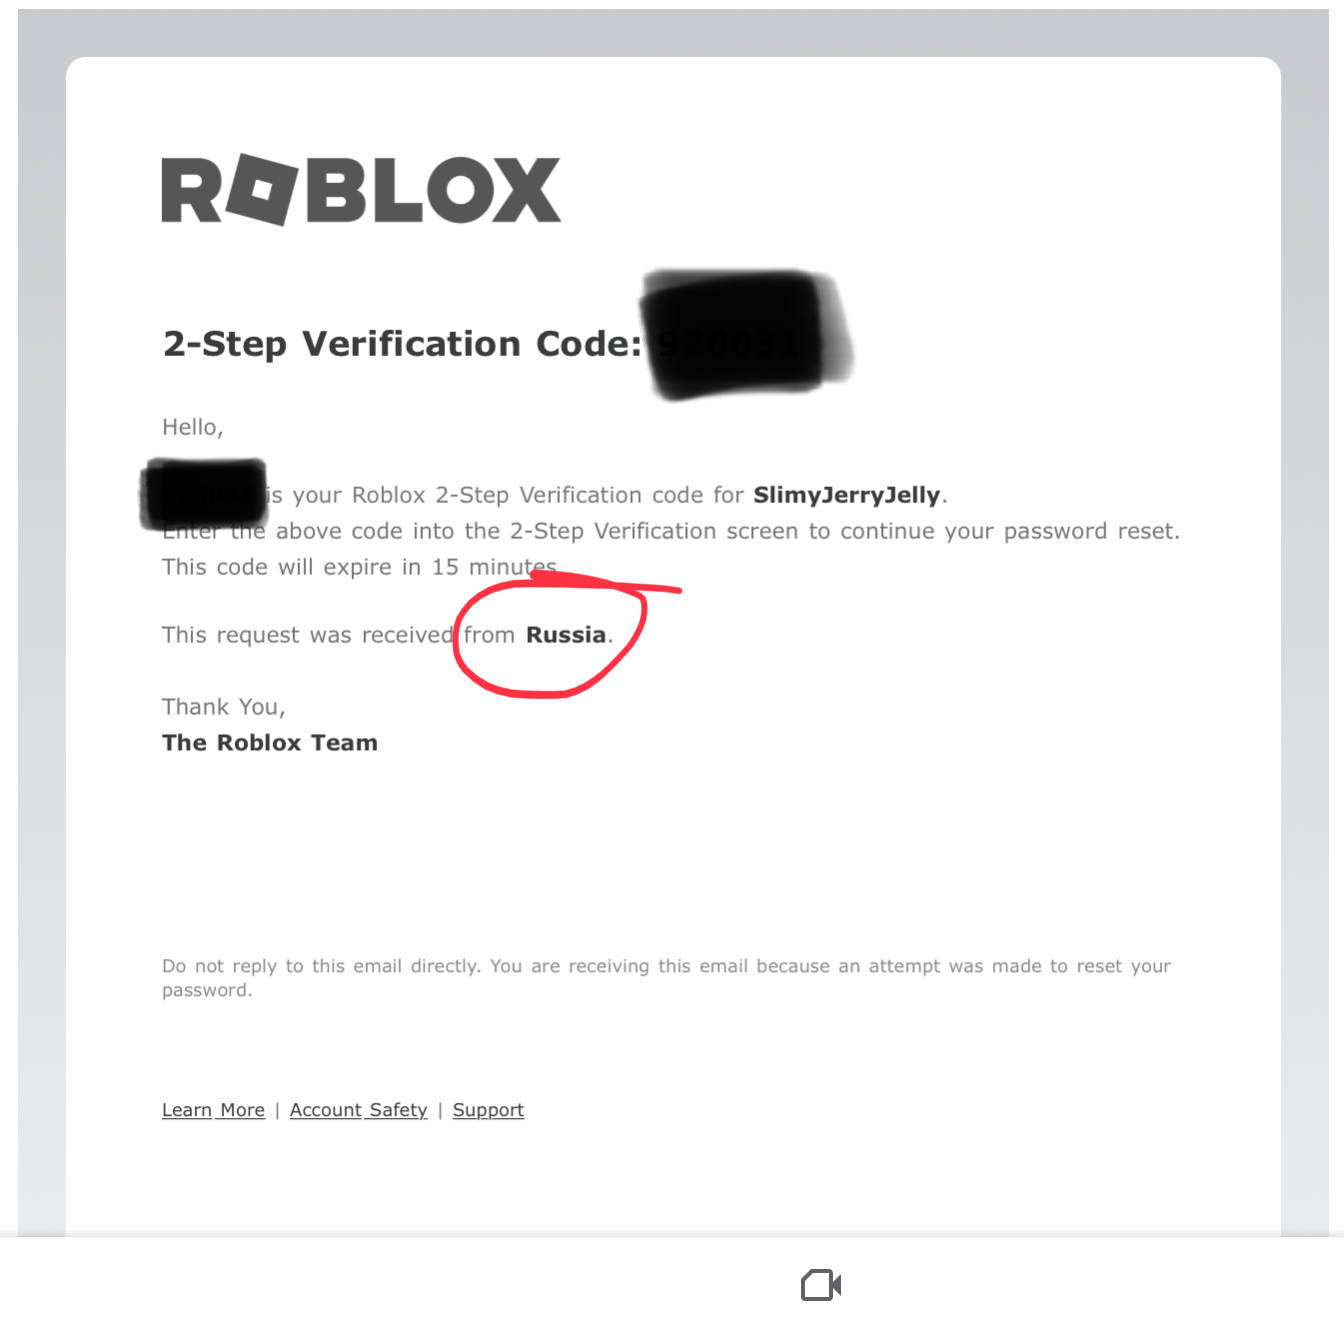 SOMEONE HACKED MY ROBLOX ACCOUNT 